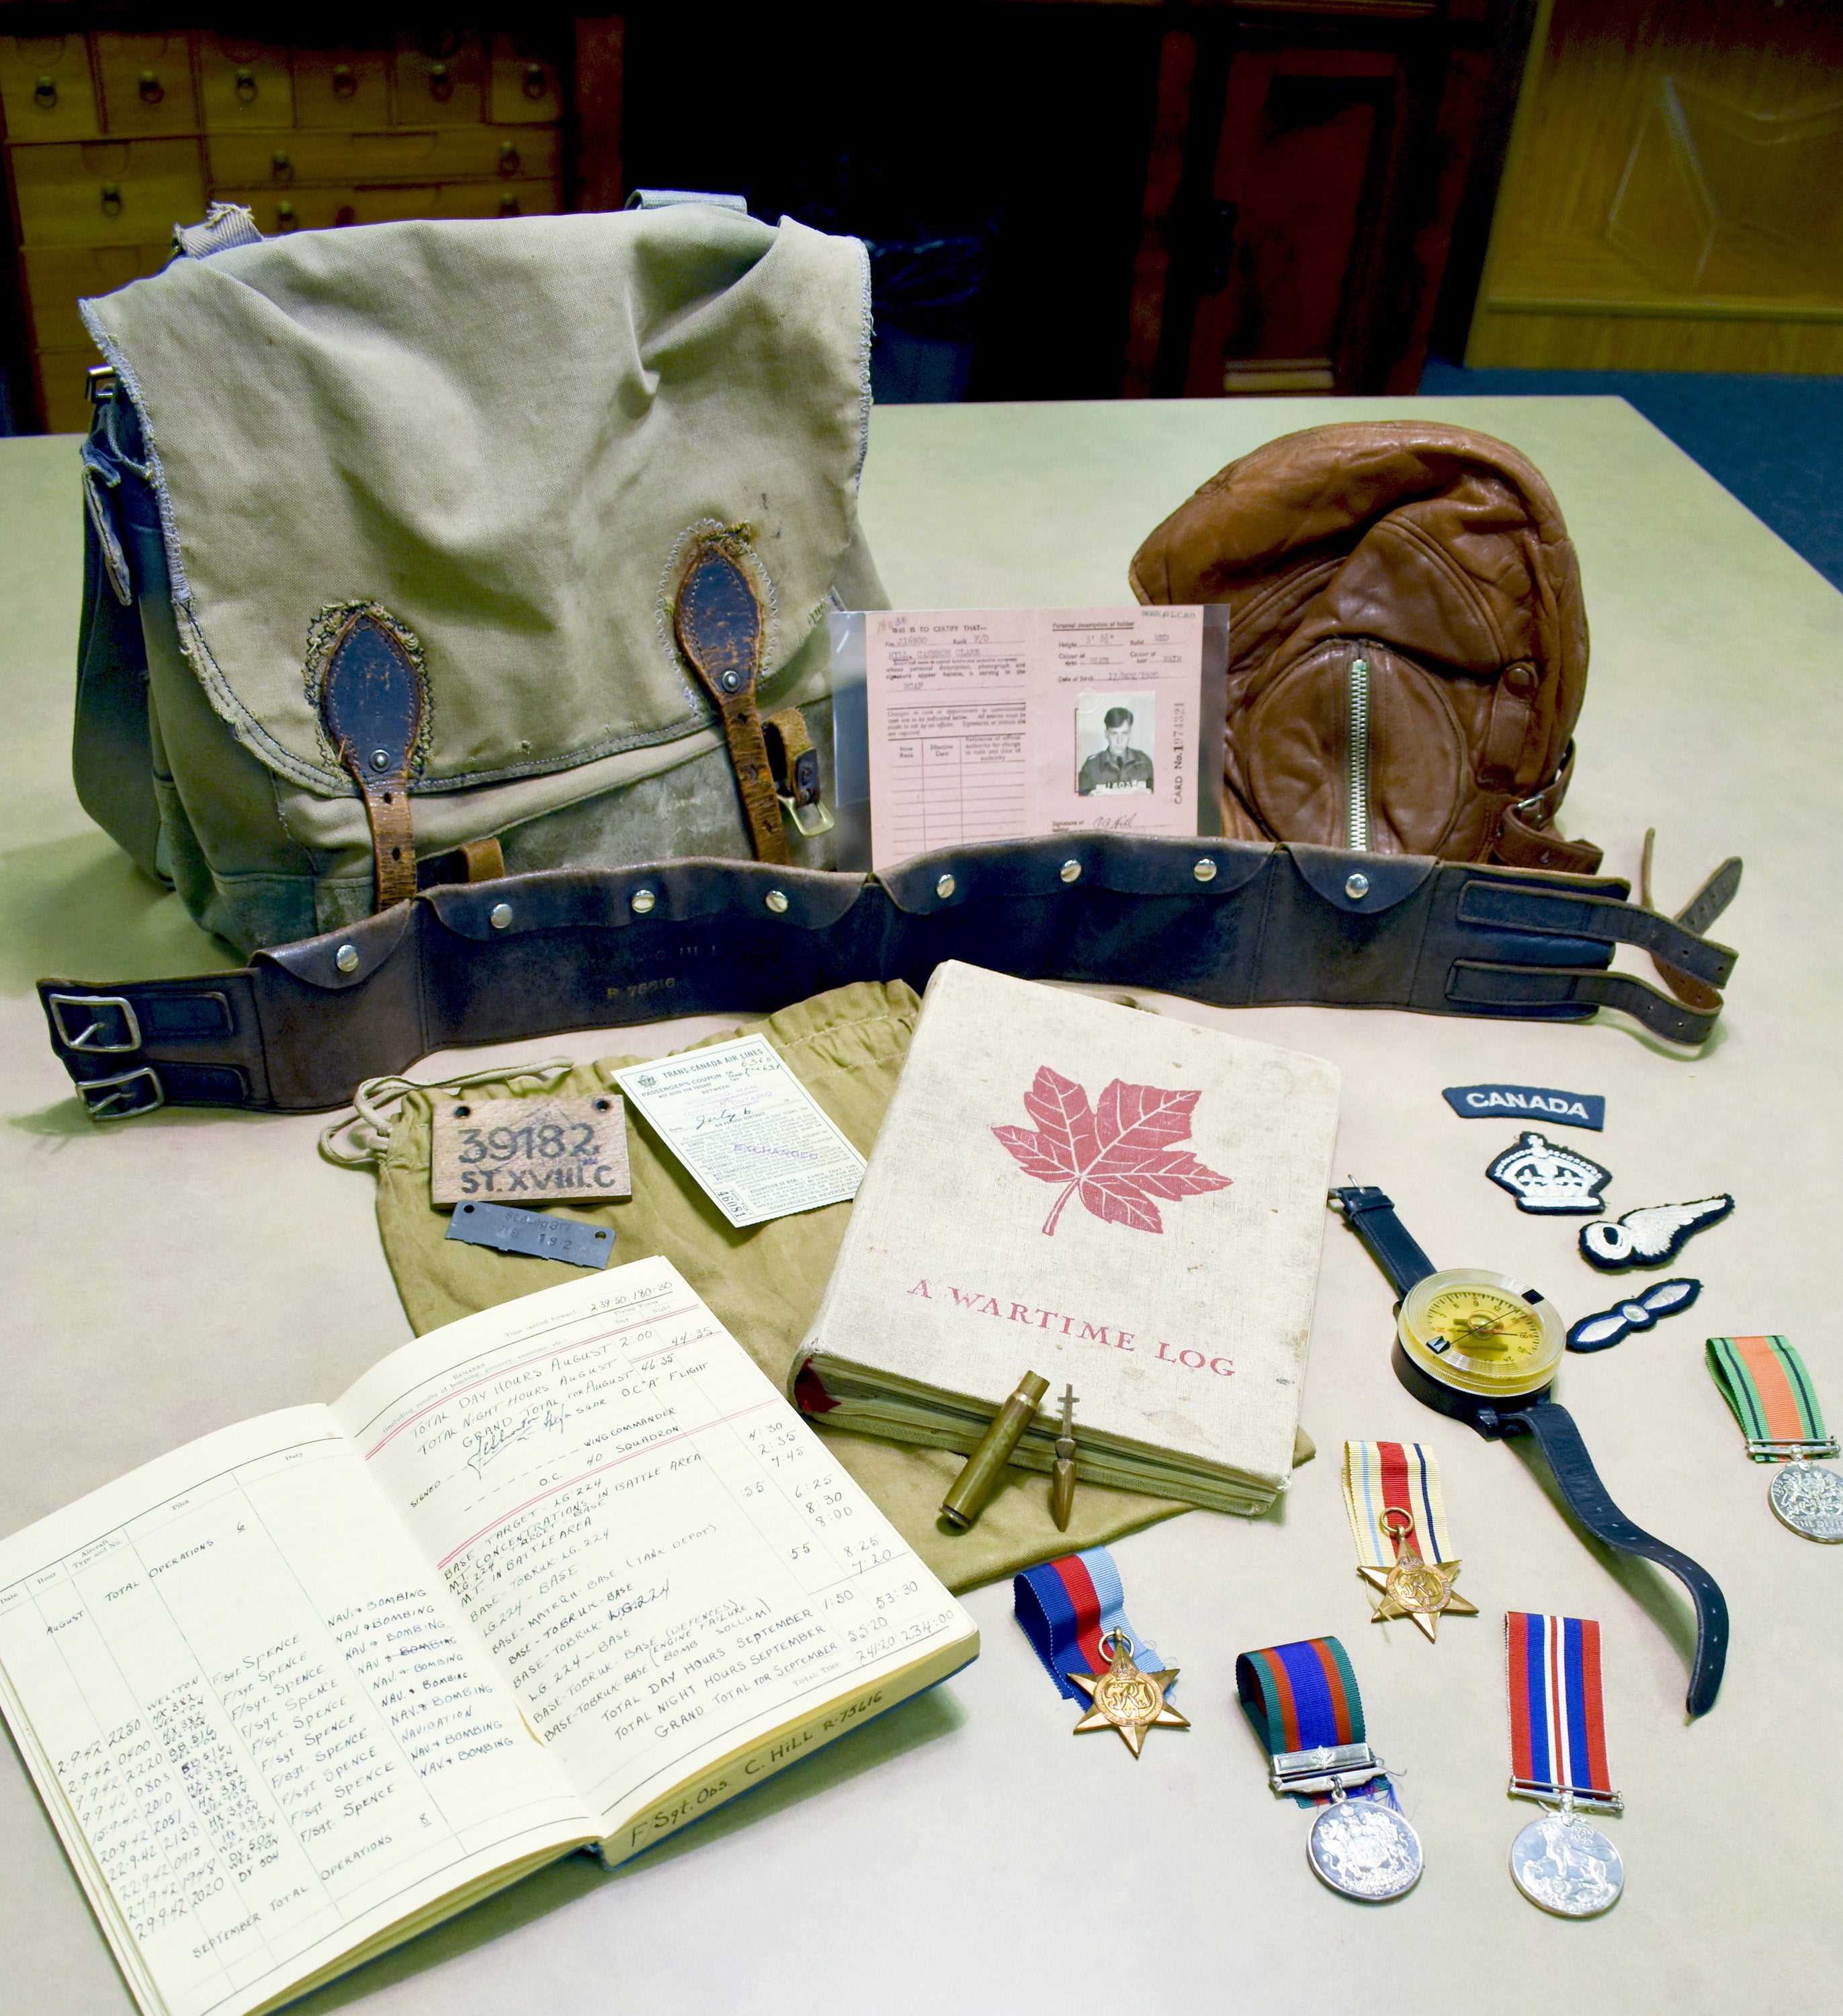 Gear, medals and artifacts from WWII